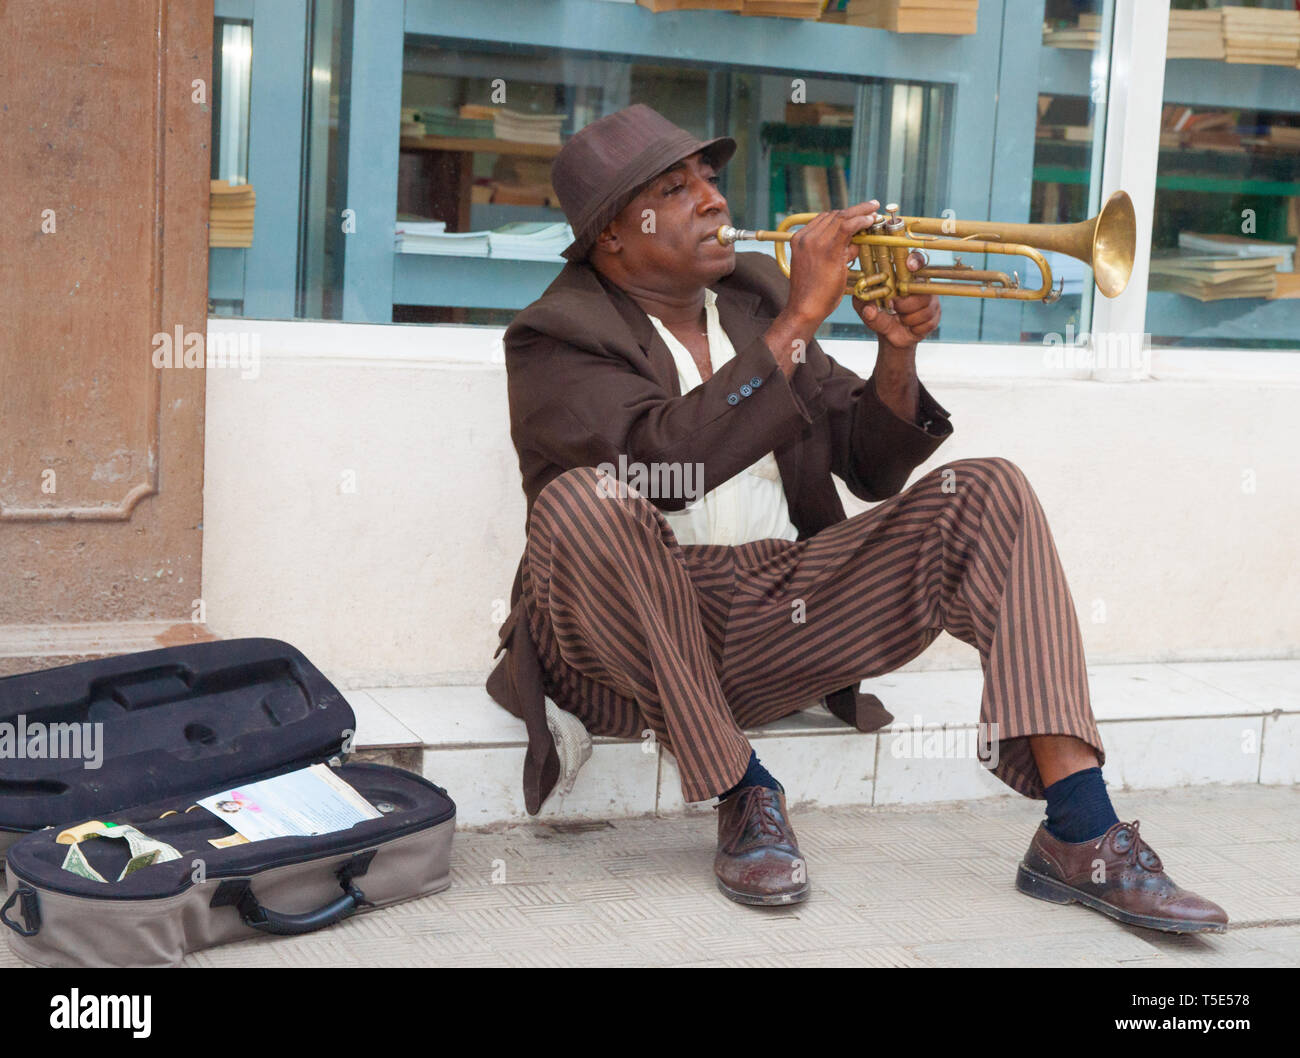 HAVANA CUBA - JULY 8 2012; Street music  in Havana with Afro-Cuban man busking while sitting on footpath in front shop window playing trumpet. Stock Photo